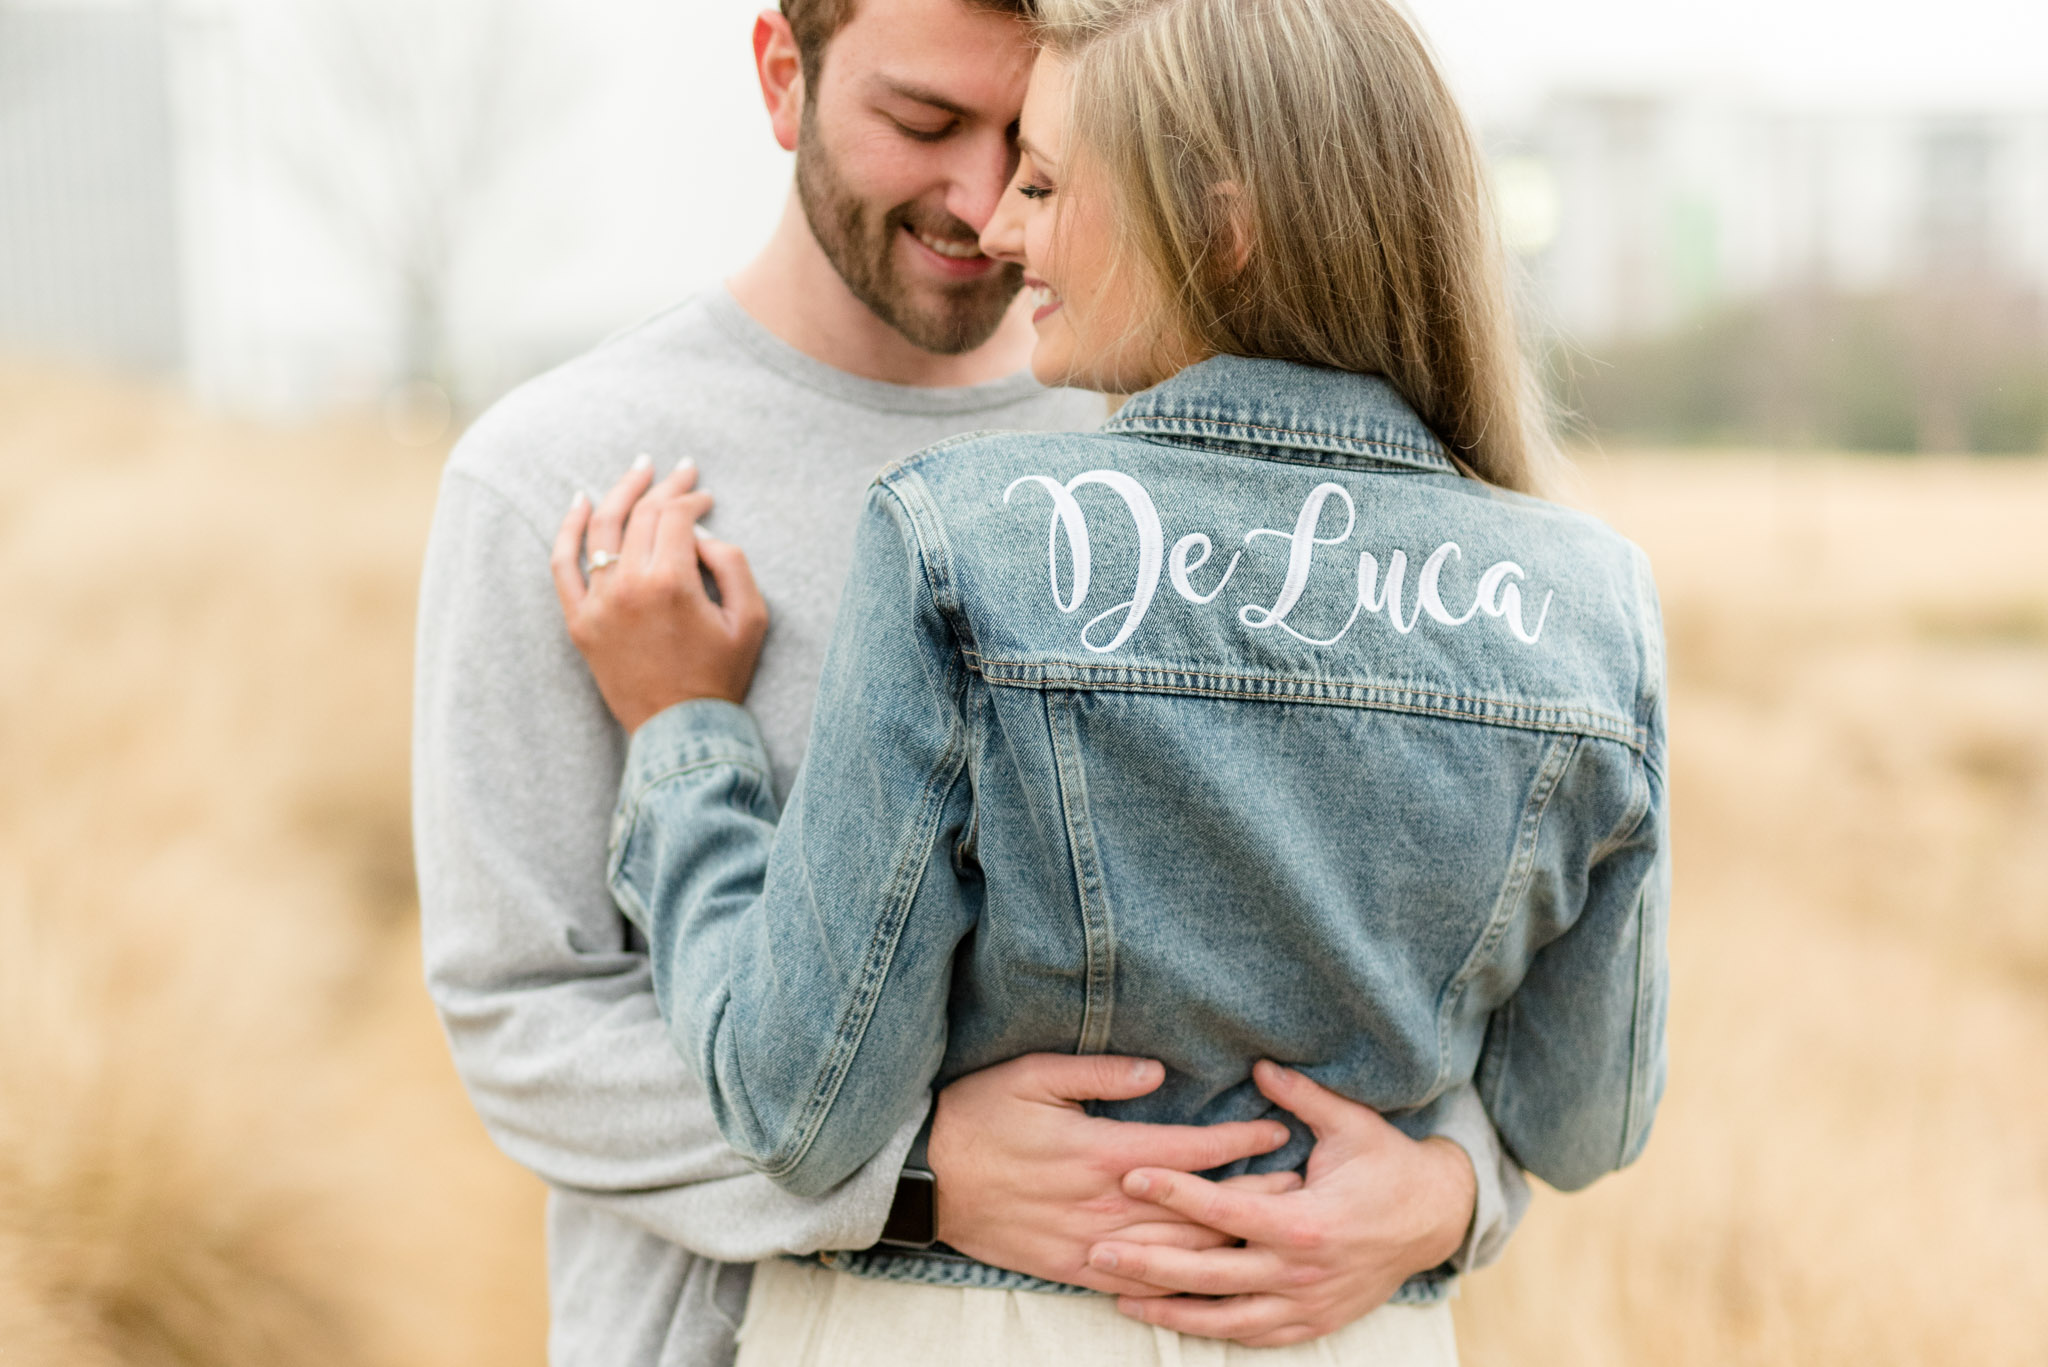 Couple cuddles showing off woman's personalized denim jacket.